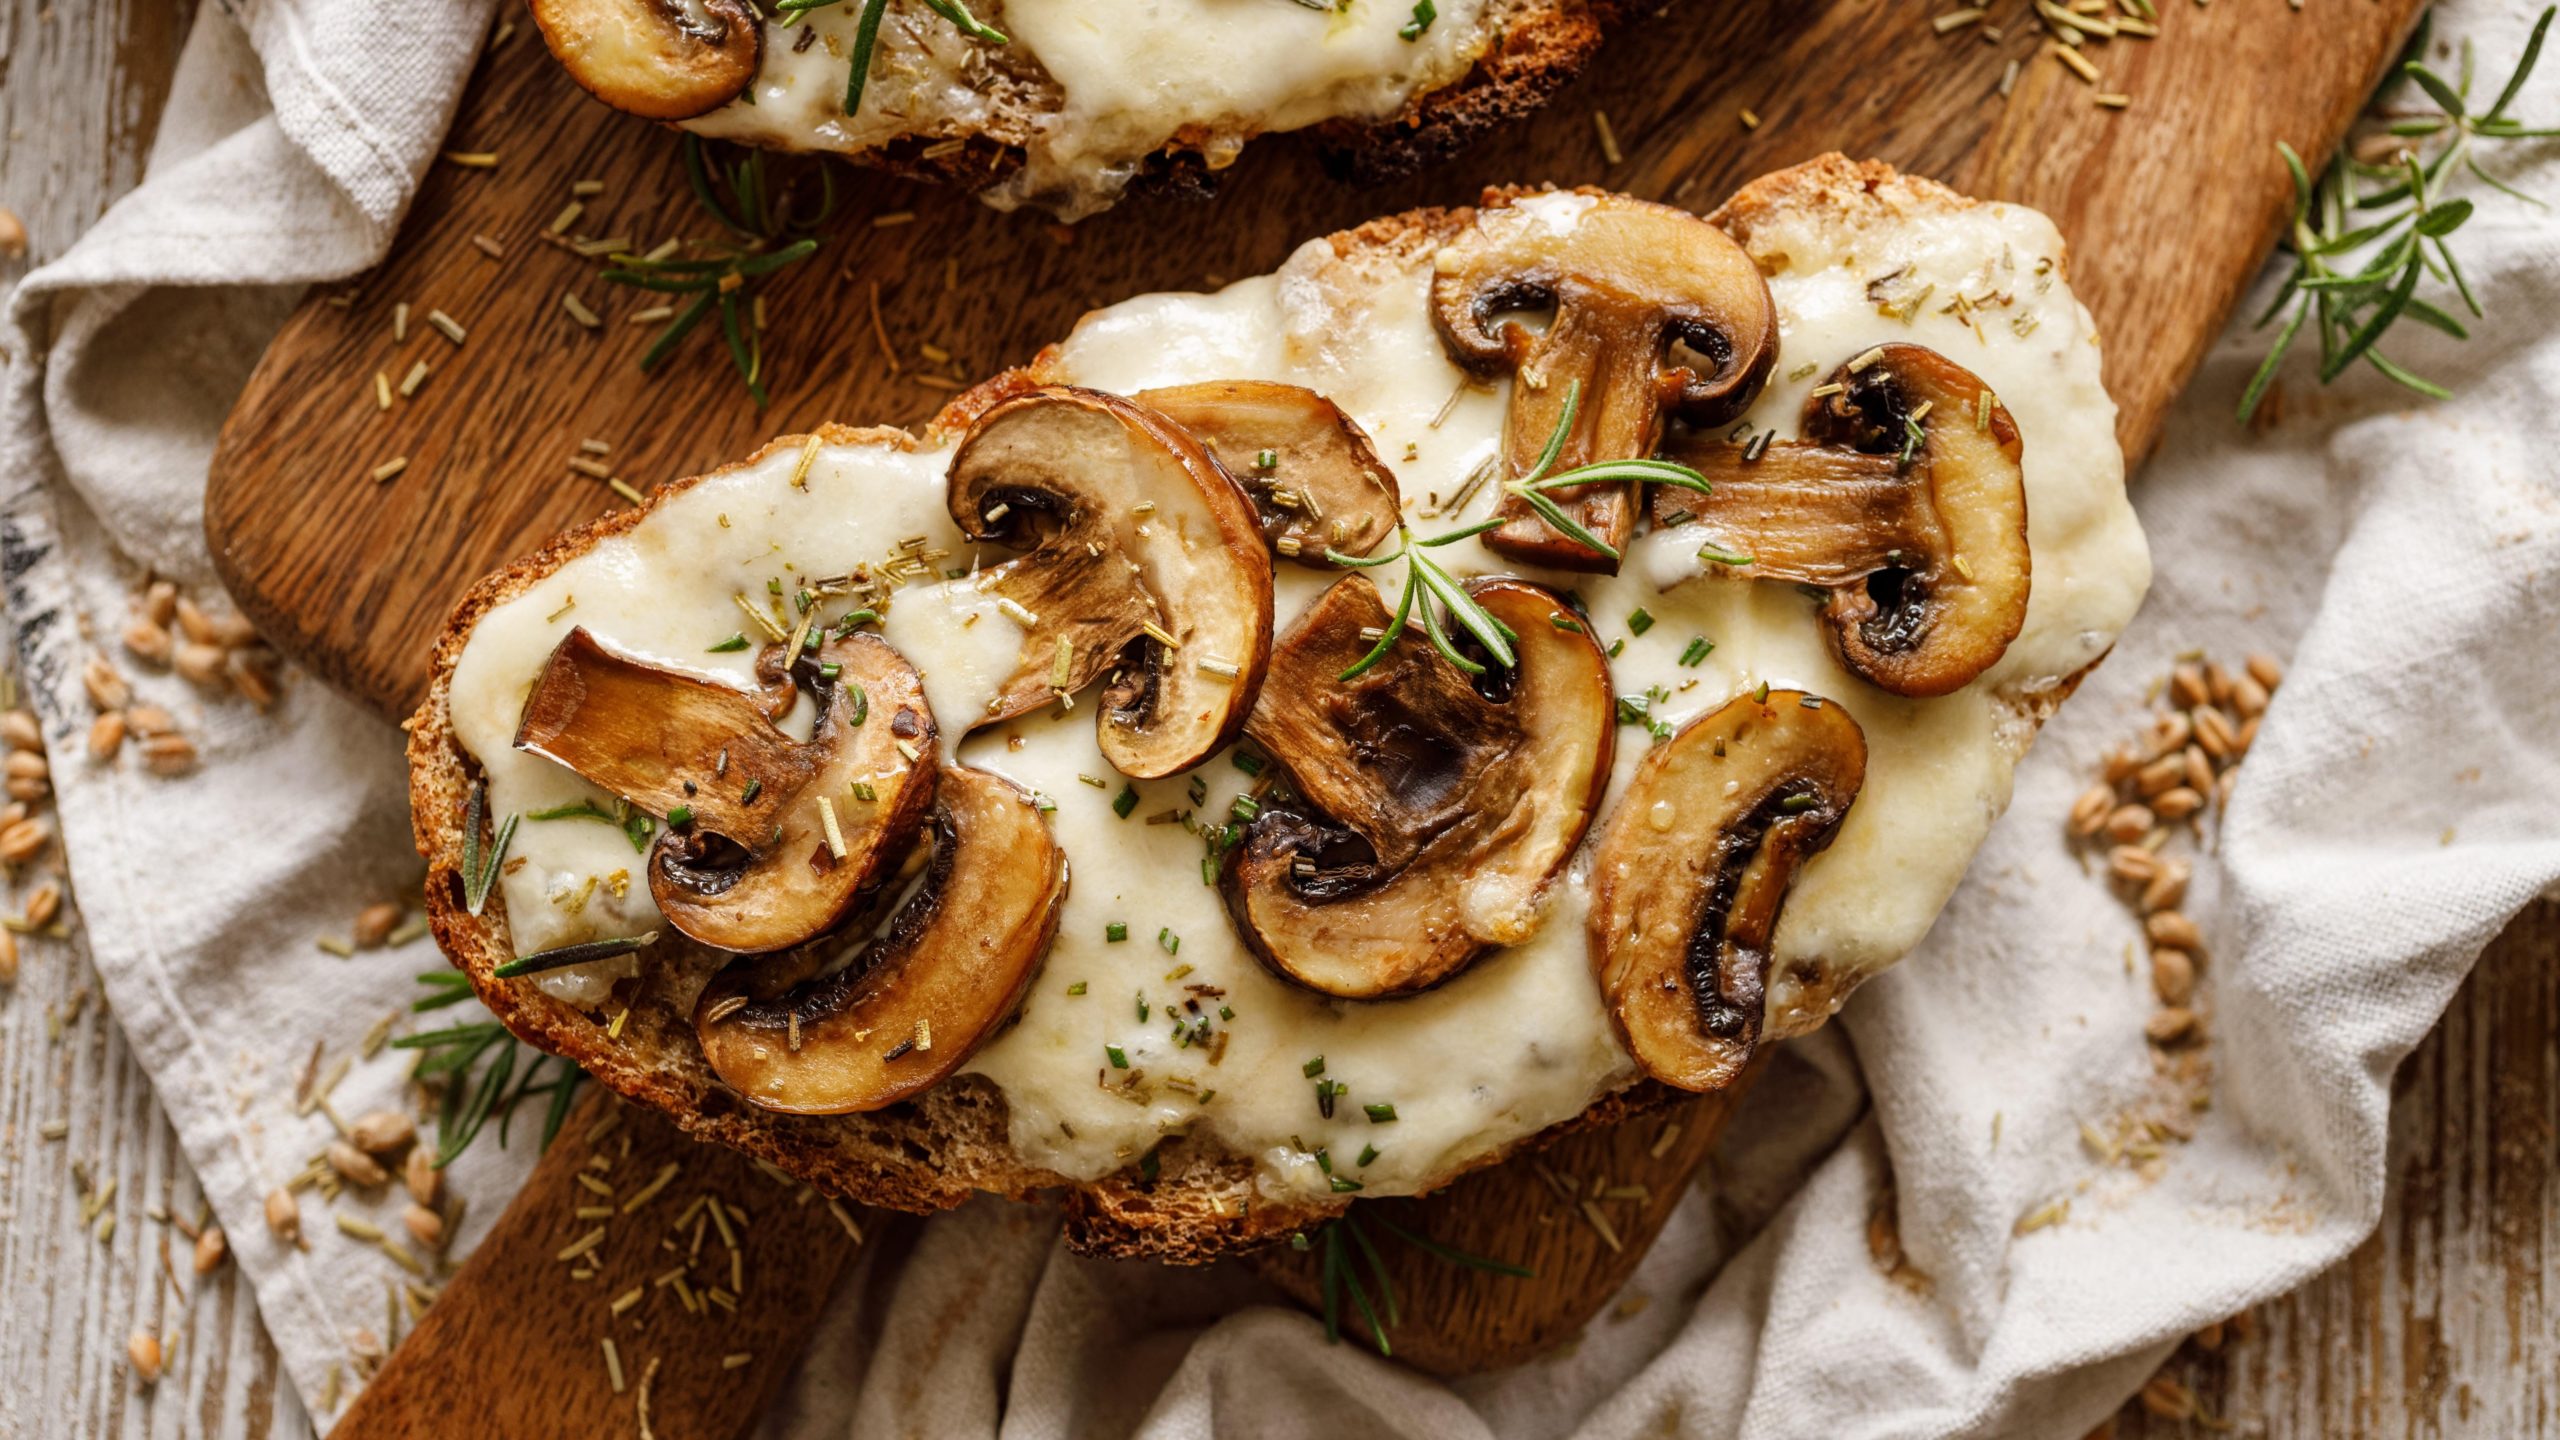 Hold the Fat While Cooking Mushrooms to Brown Them Better